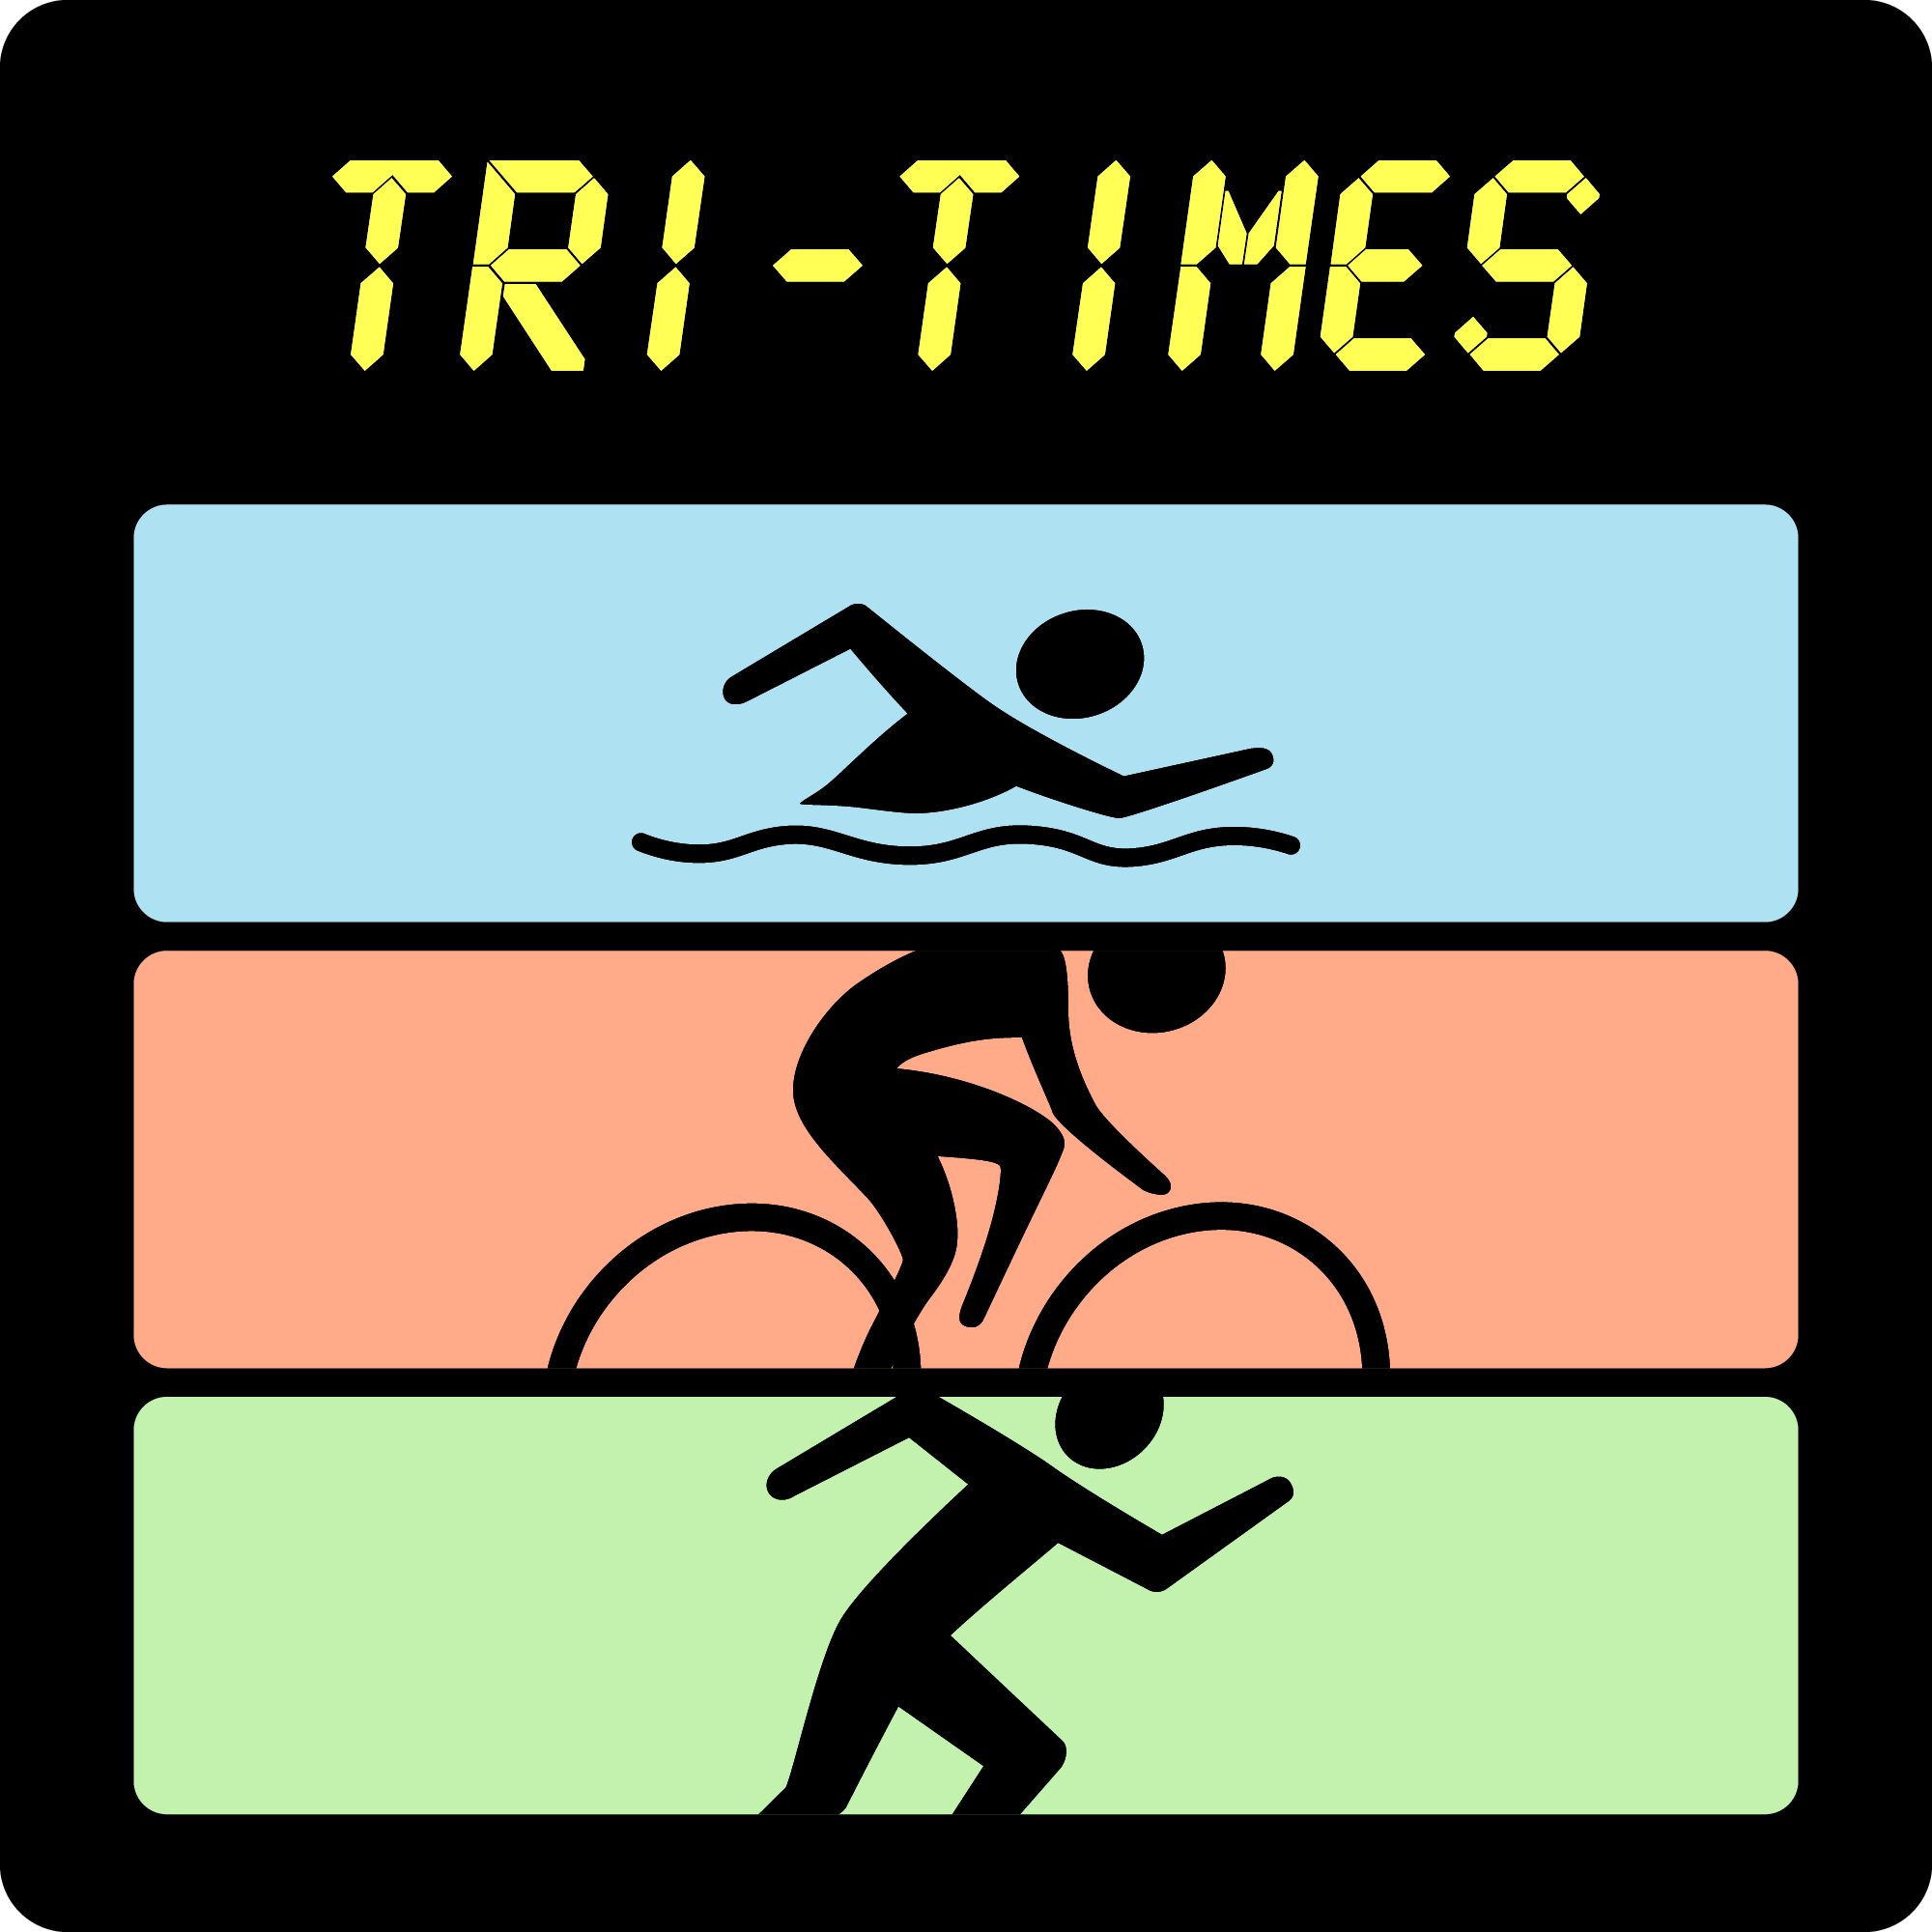 Tri-Times podcast